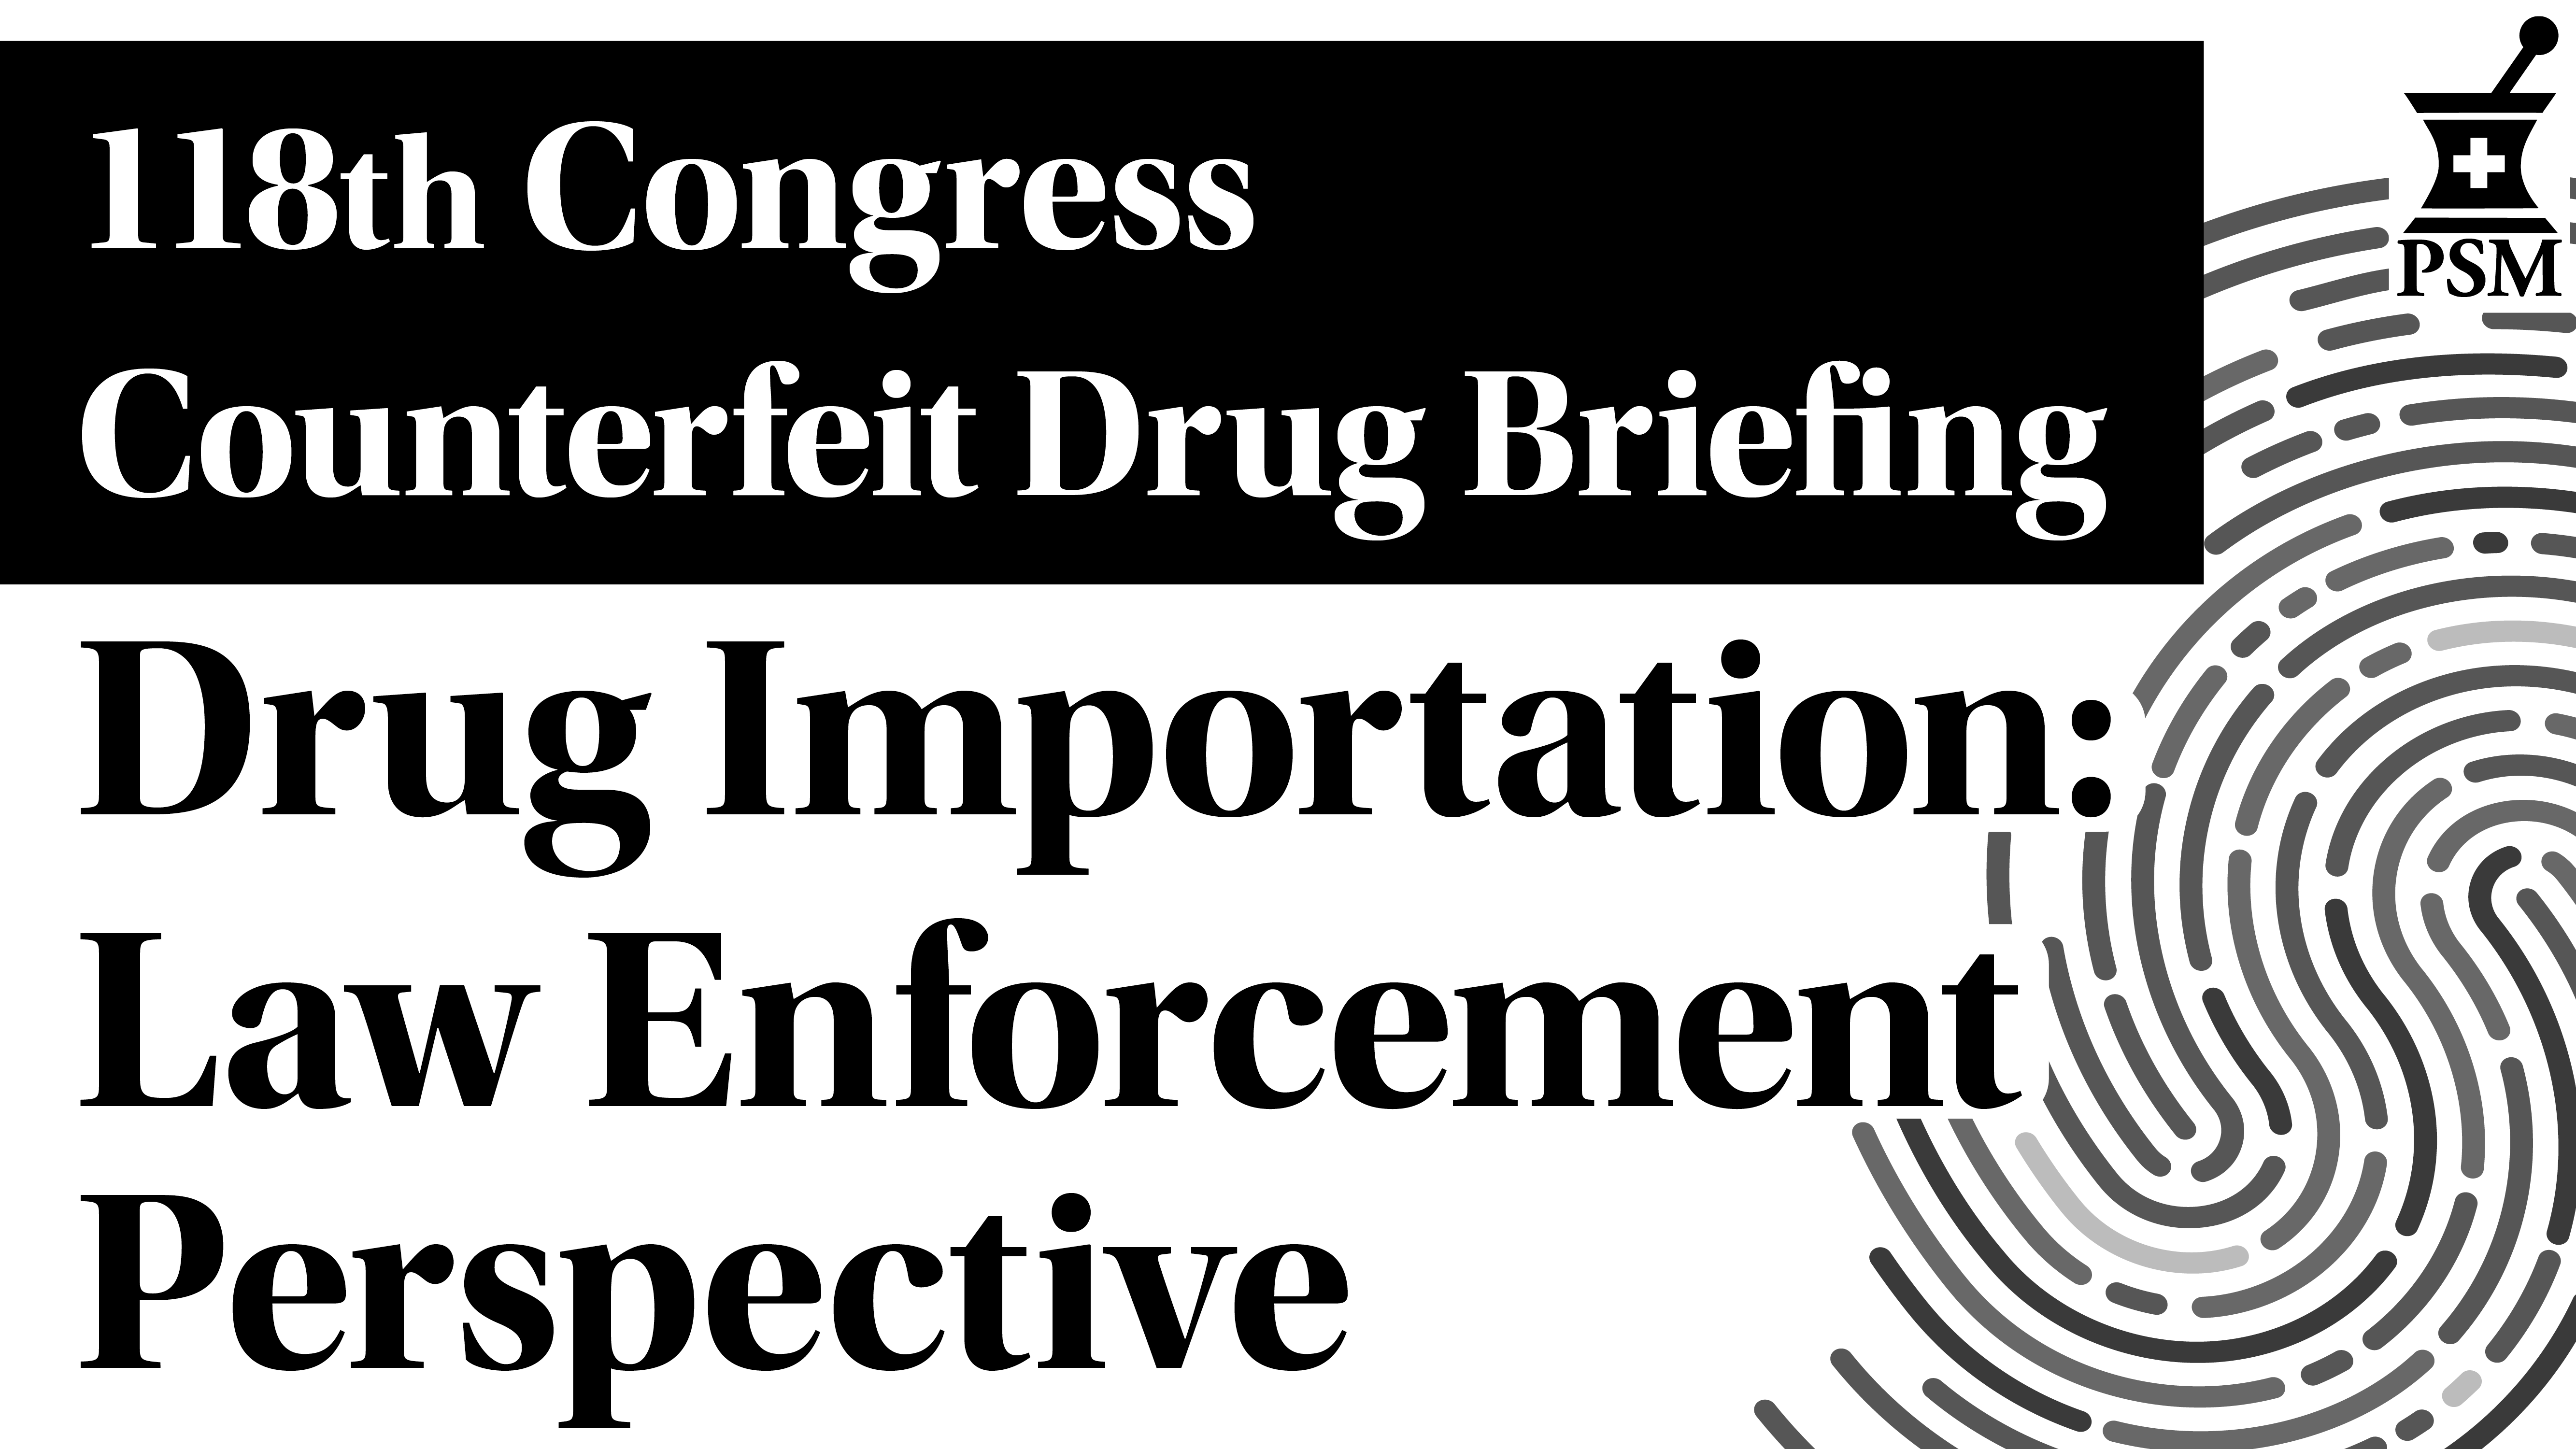 118th Congress Briefing: Drug Importation Law Enforcement Perspective